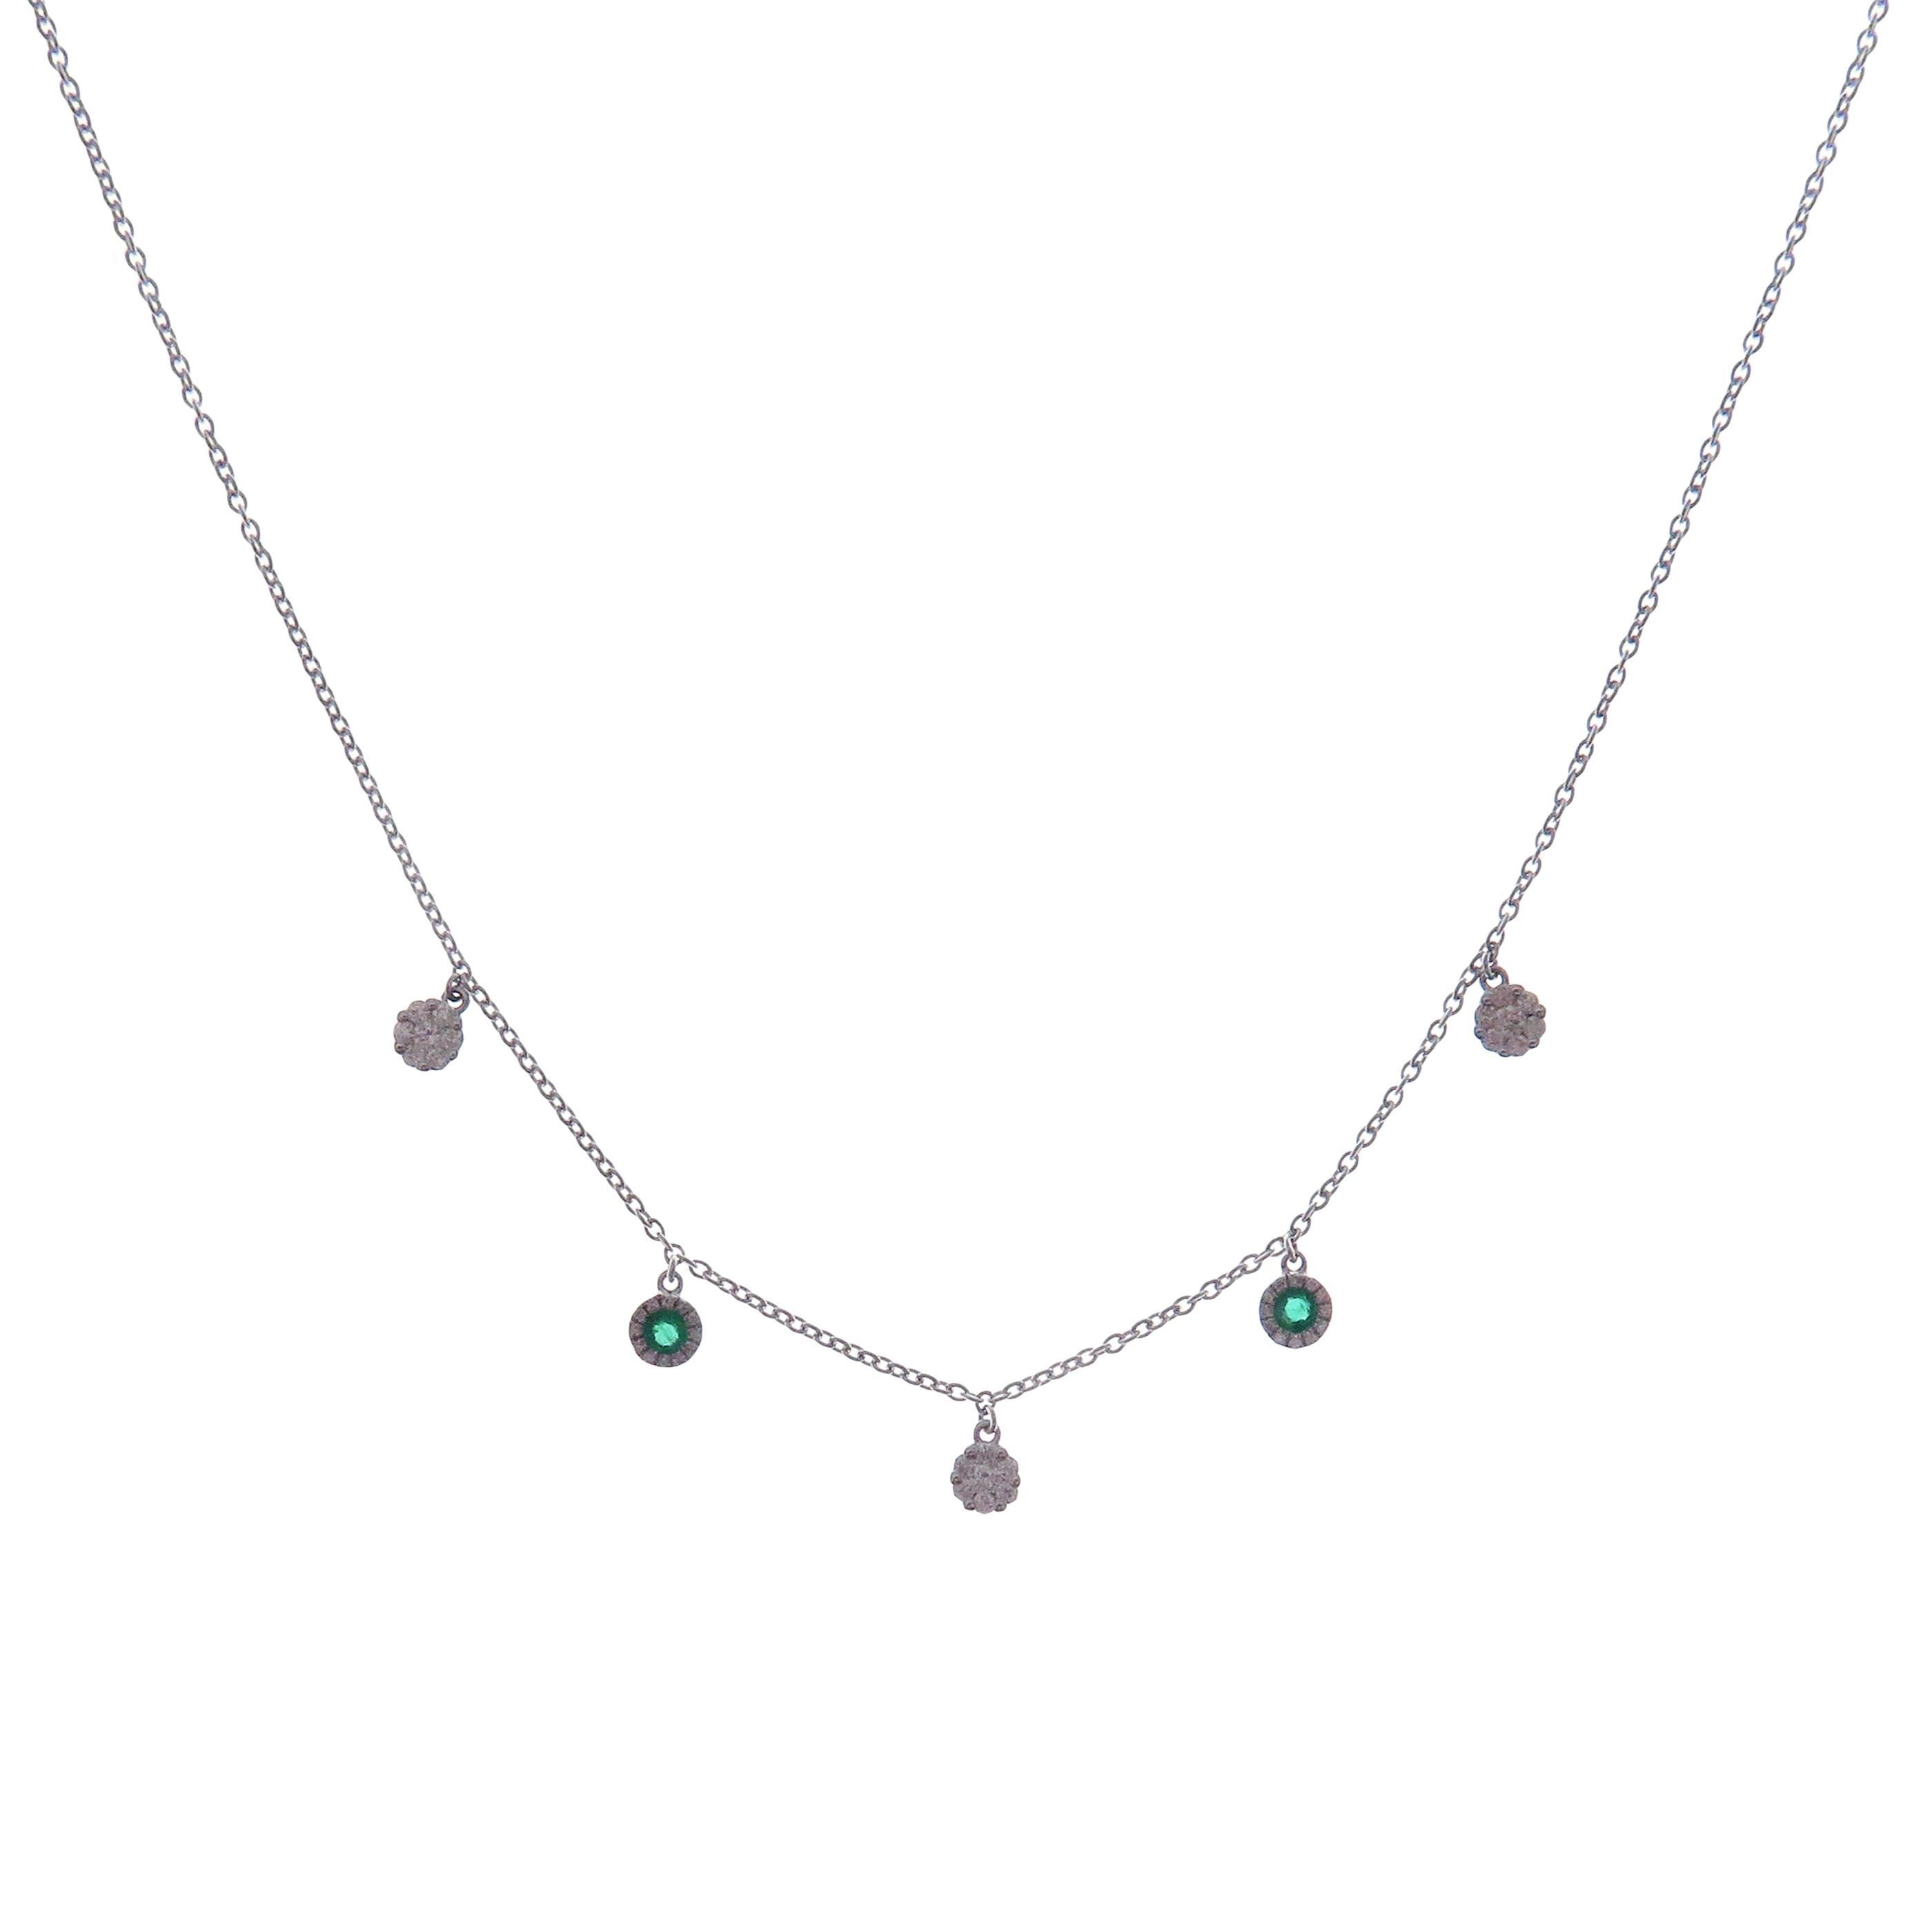 This delicate necklace is crafted in 18-karat white gold, weighing approximately 0.30 total carats of SI-H Quality white diamonds and 0.13 total carats of emerald stones. 

Necklace is 16